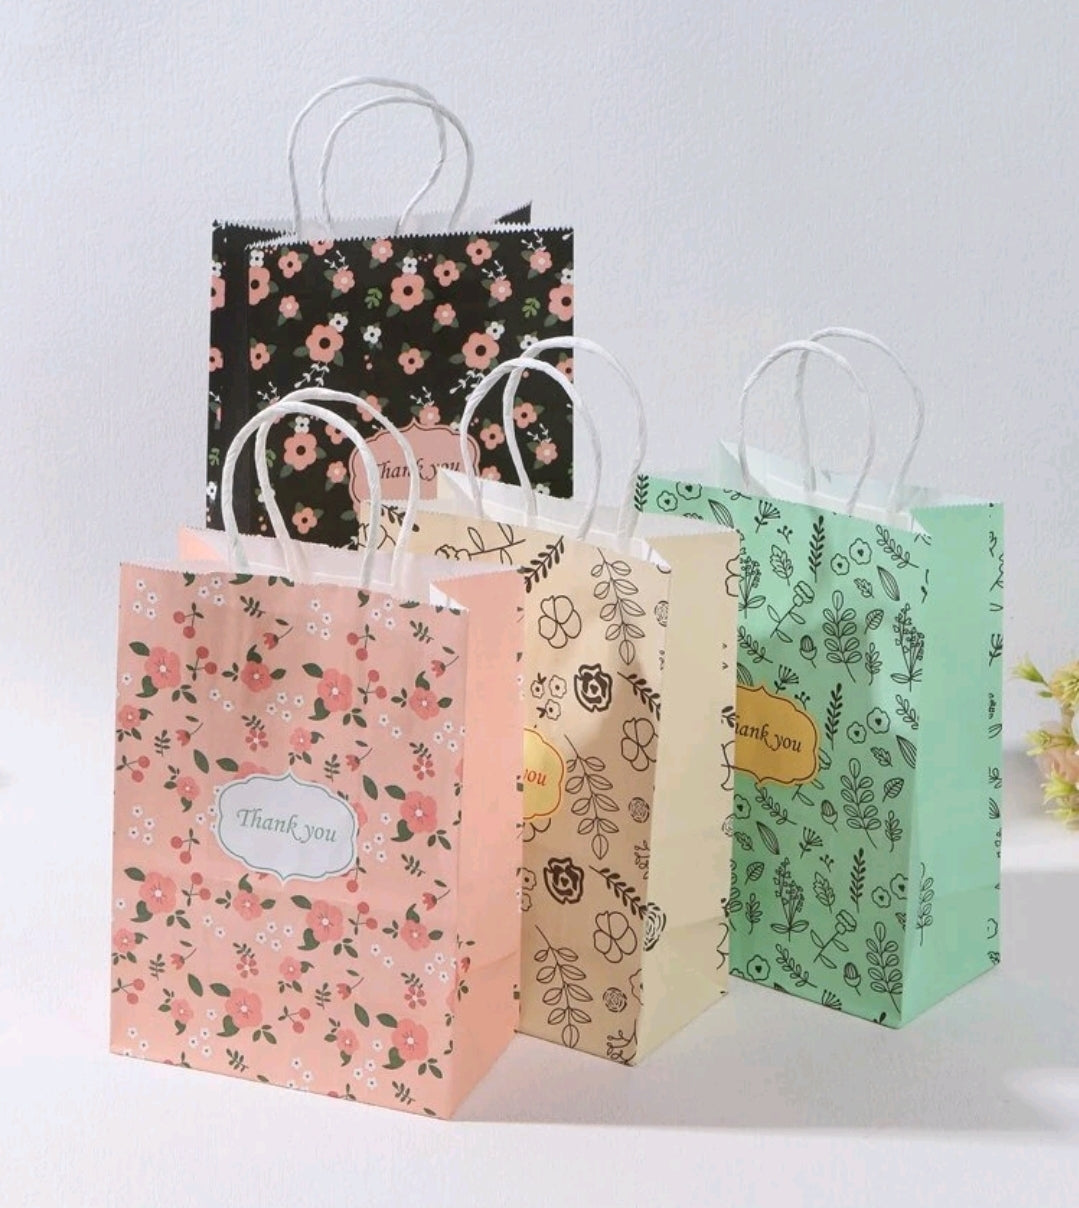 Thank you flower shopping bag 4x9x2in